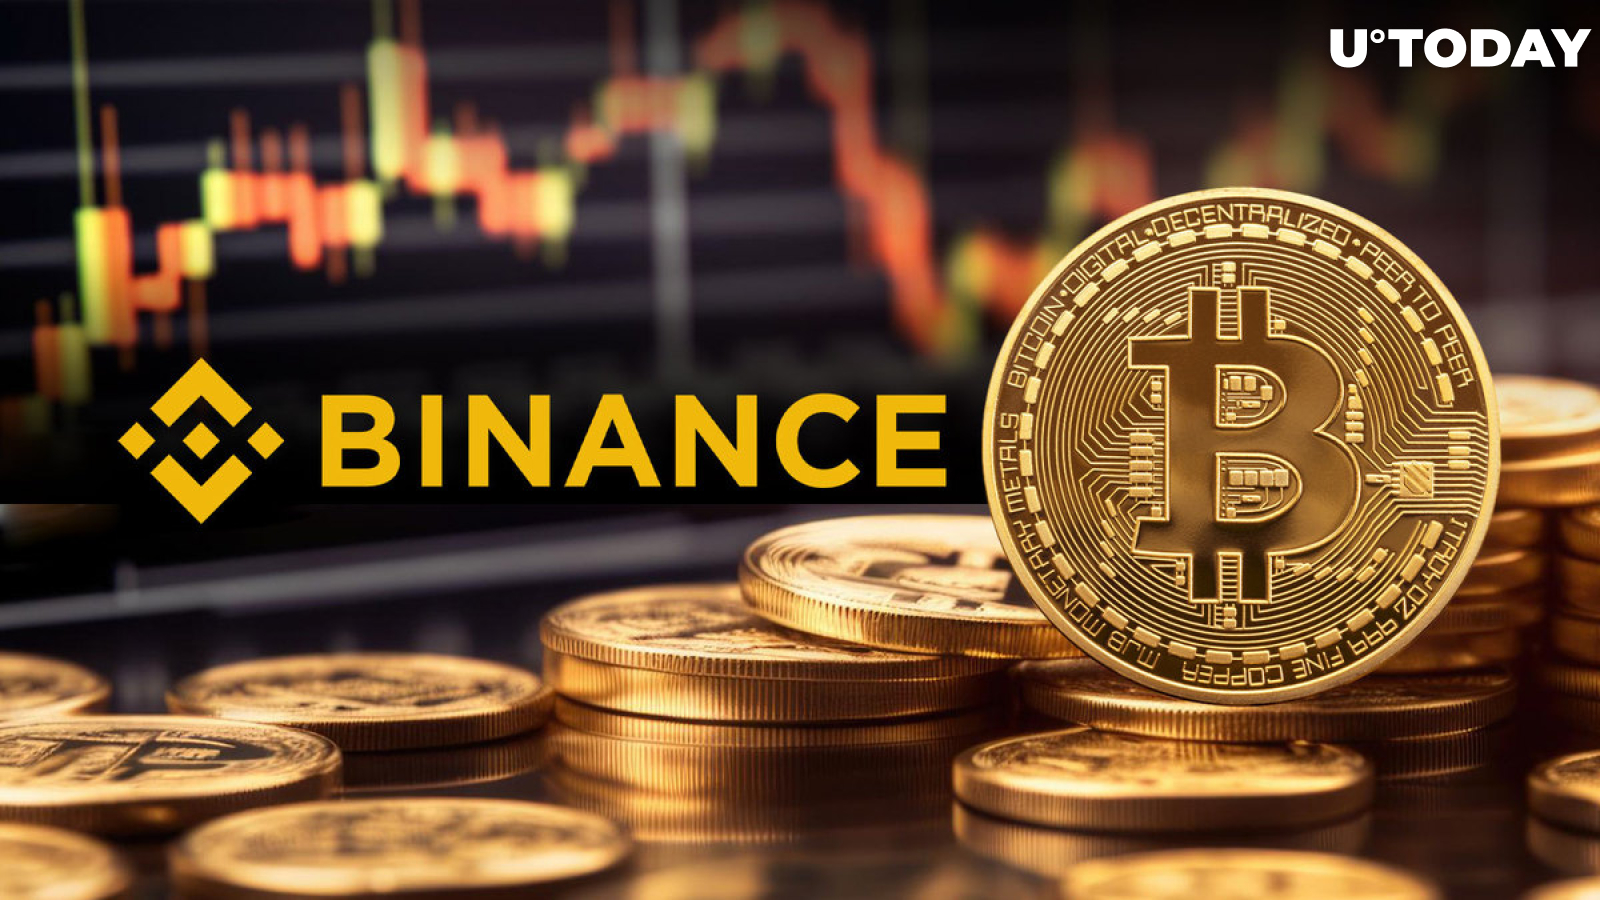 Bitcoin (BTC) Pair Suddenly Jumps to $420,000 on Binance, What Happened?